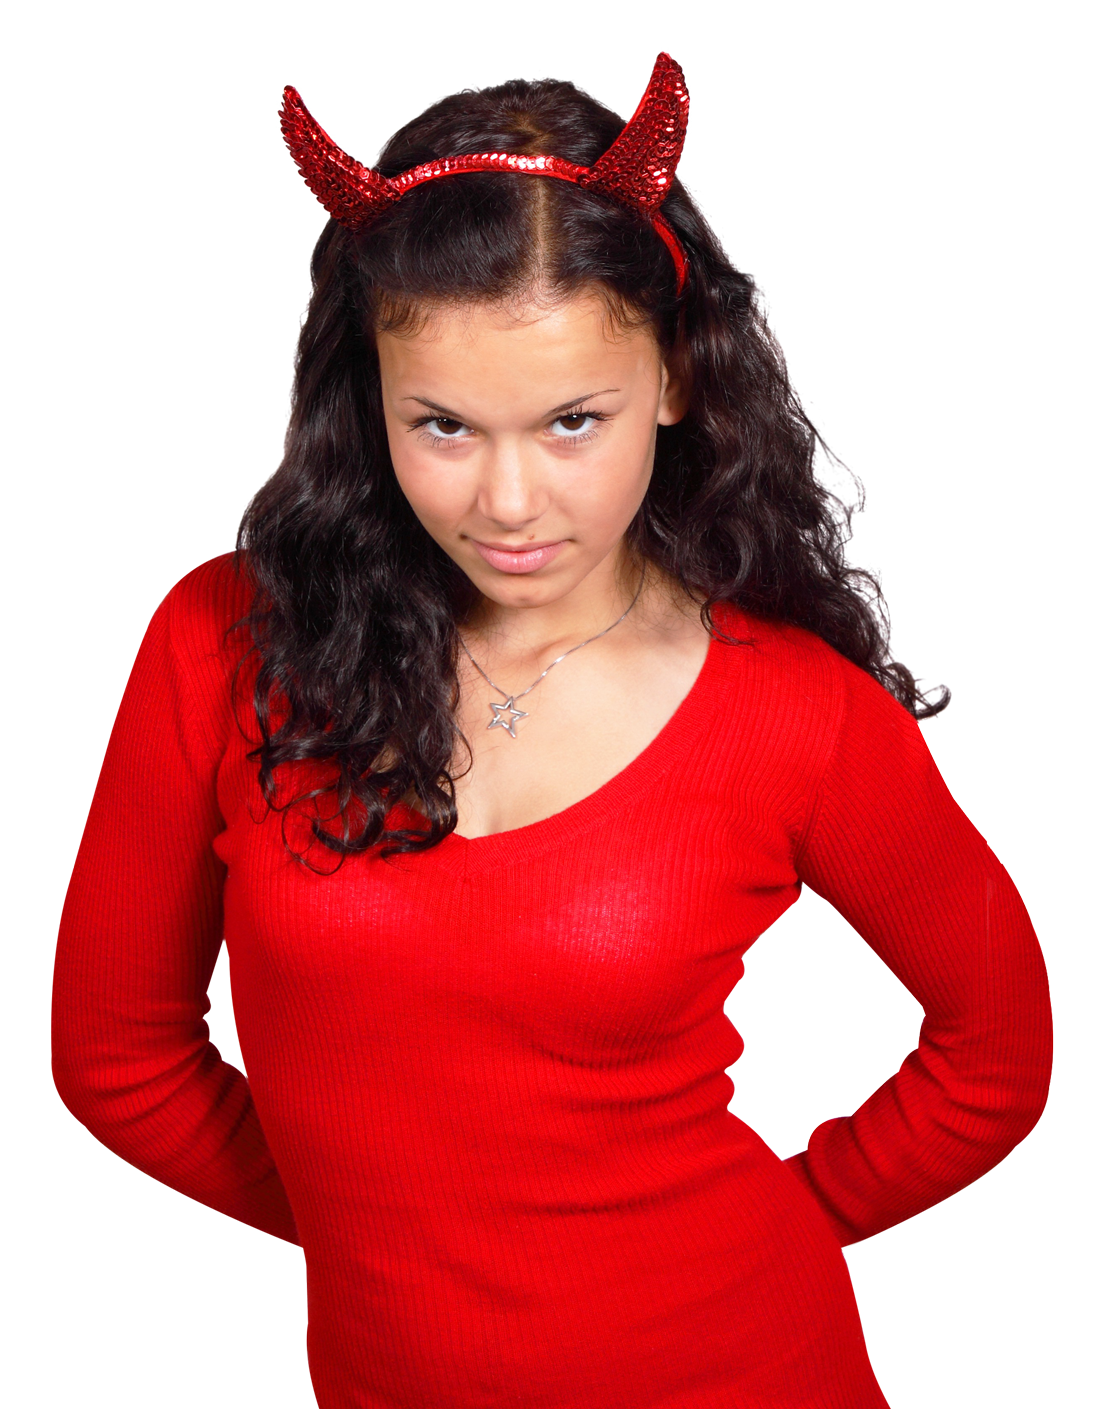 A Woman Wearing A Red Dress And Devil Horns